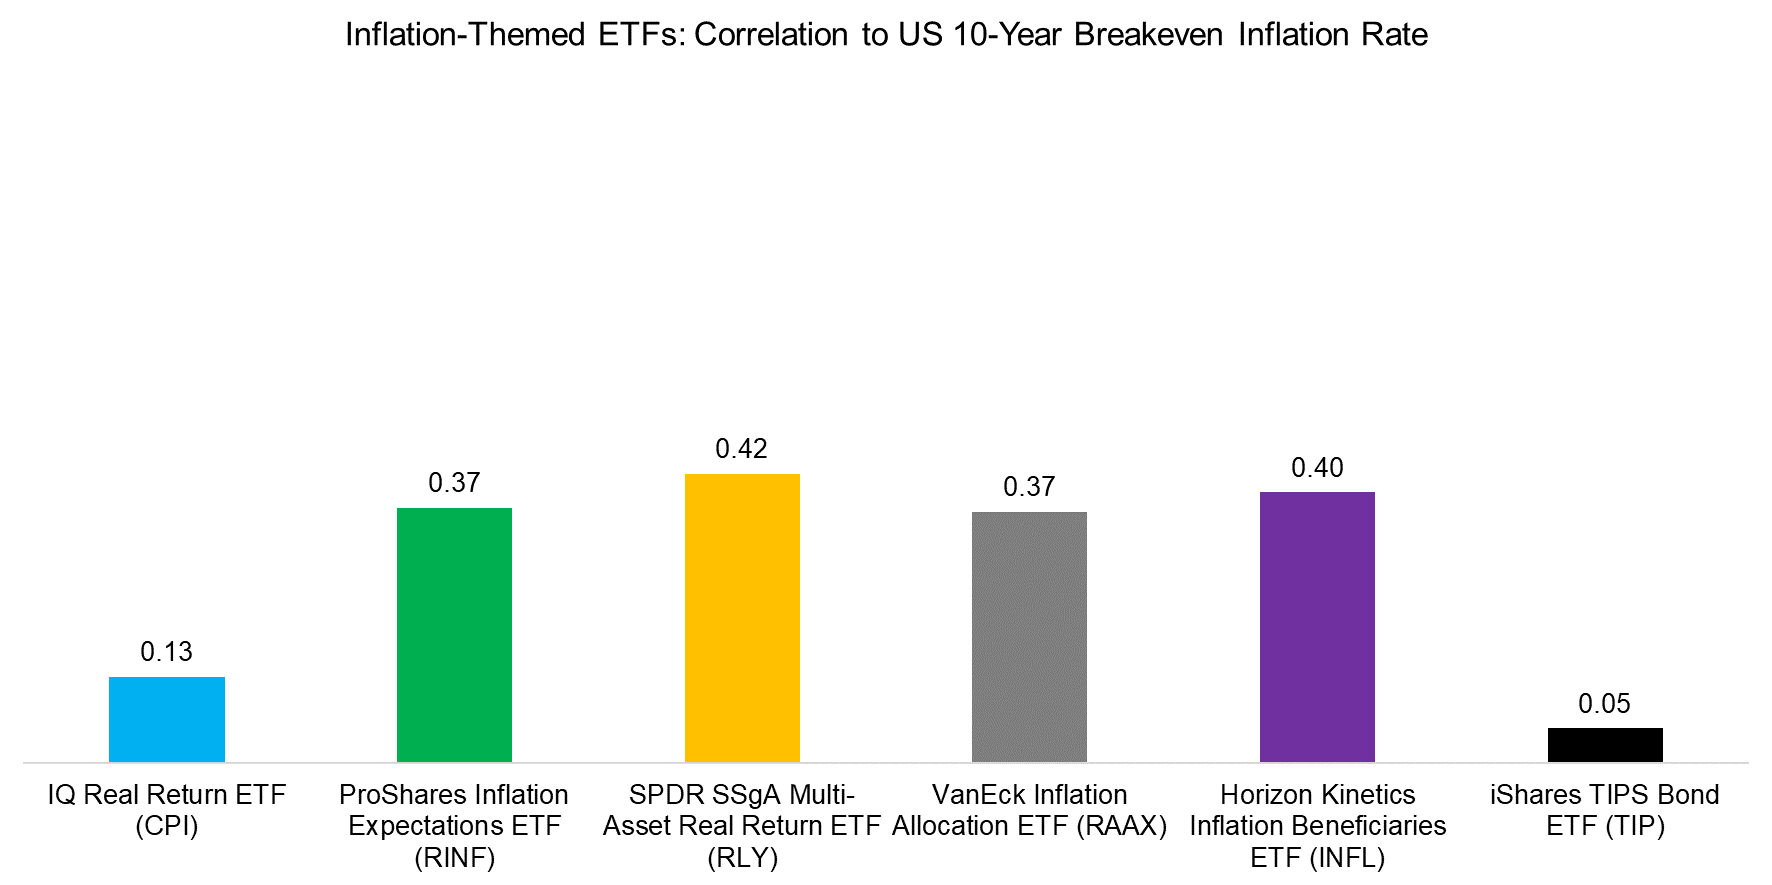 Inflation-Themed ETFs Correlation to US 10-Year Breakeven Inflation Rate